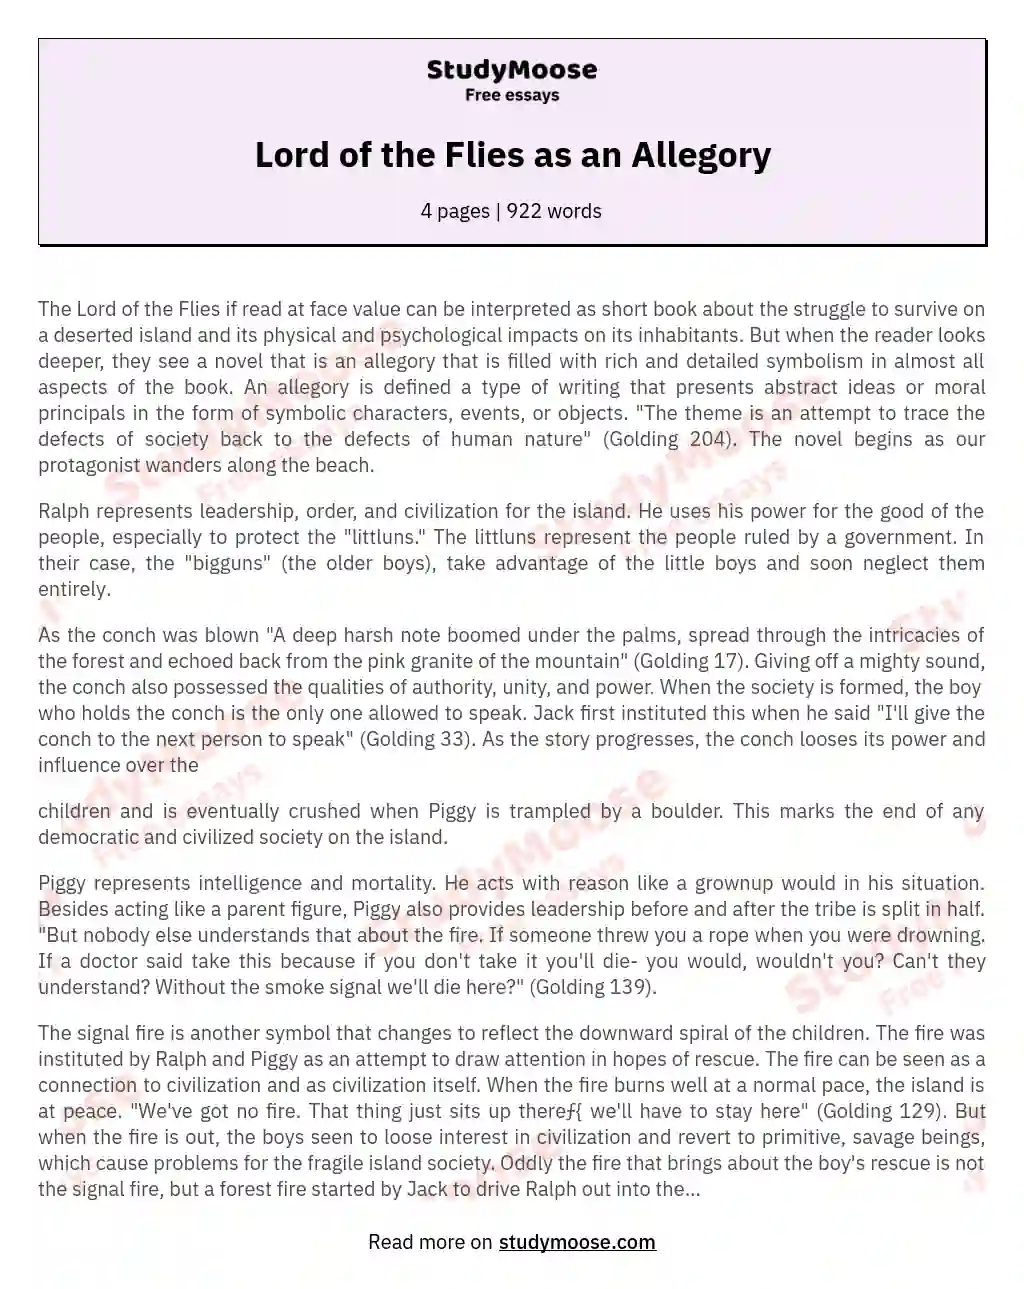 Lord of the Flies as an Allegory essay